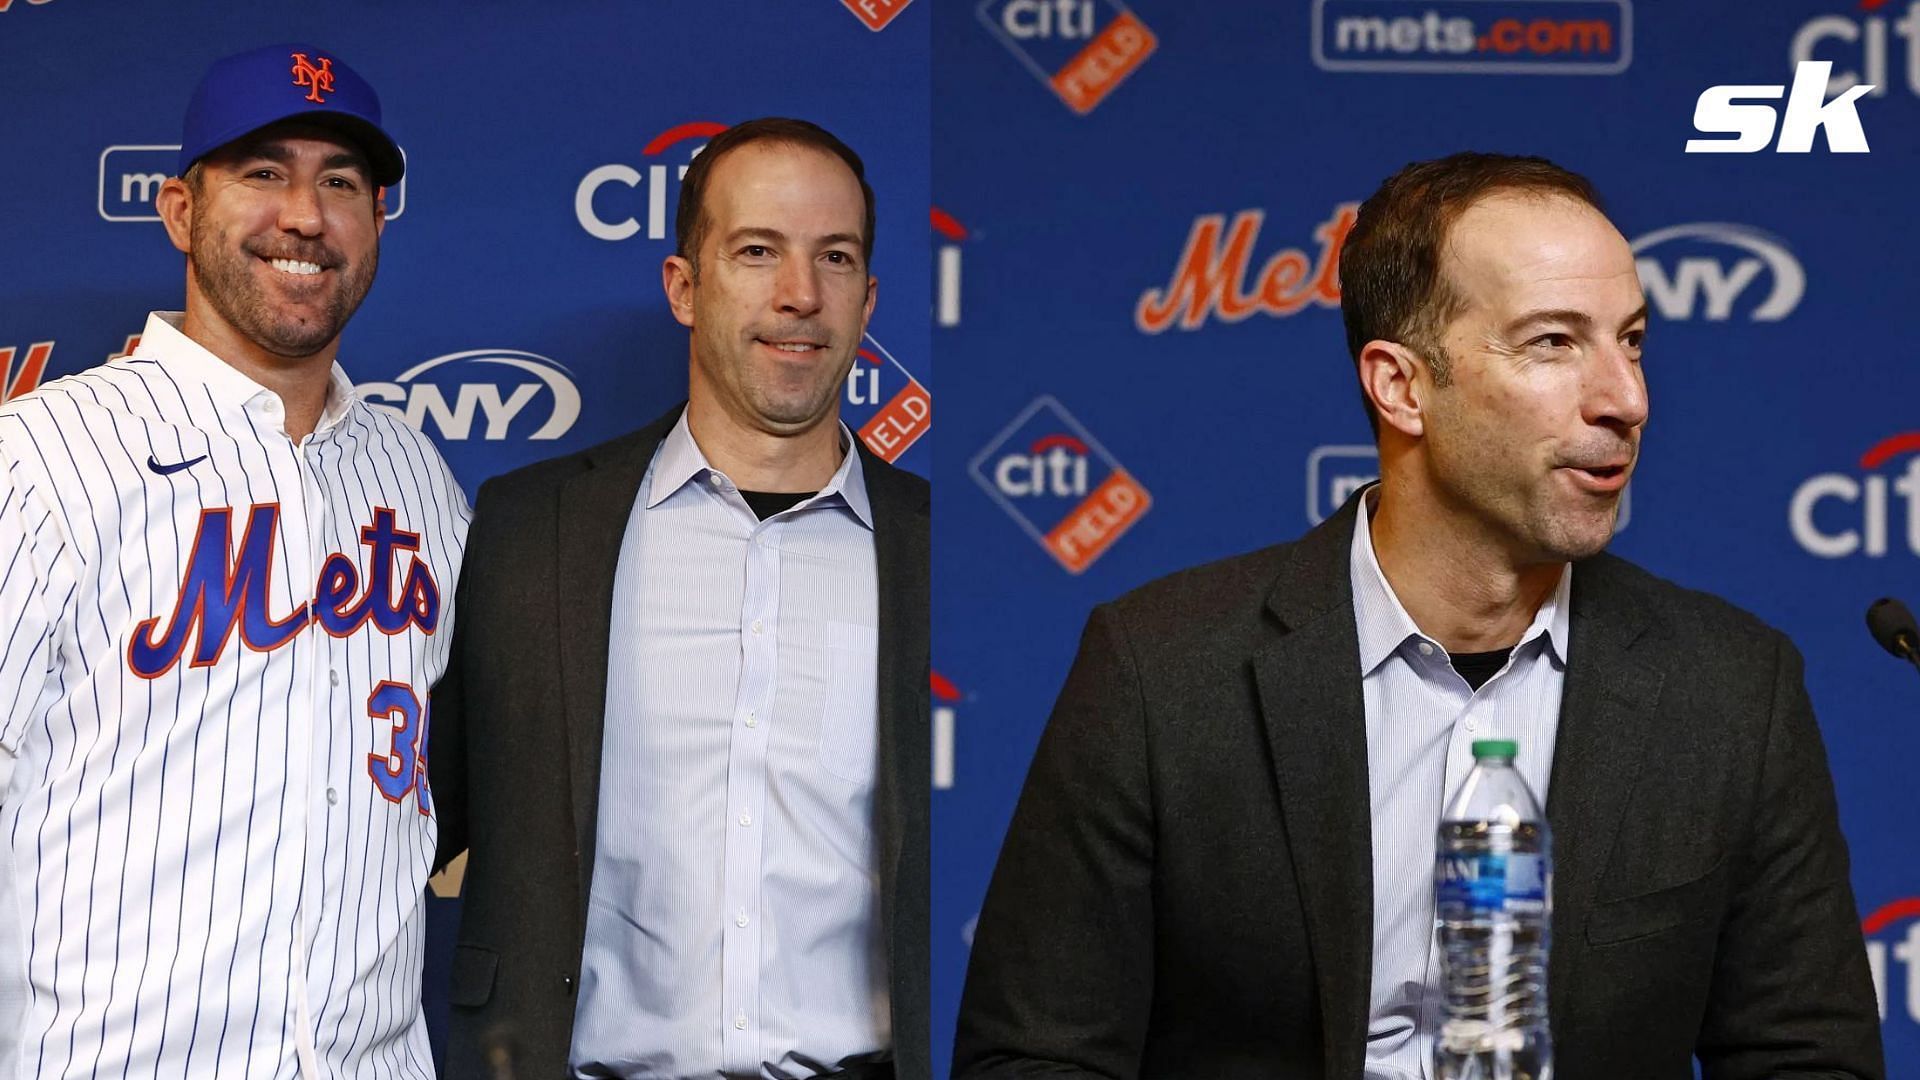 Former Mets GM Billy Eppler has received a one-year placement on the ineligible list following misuse of injury list